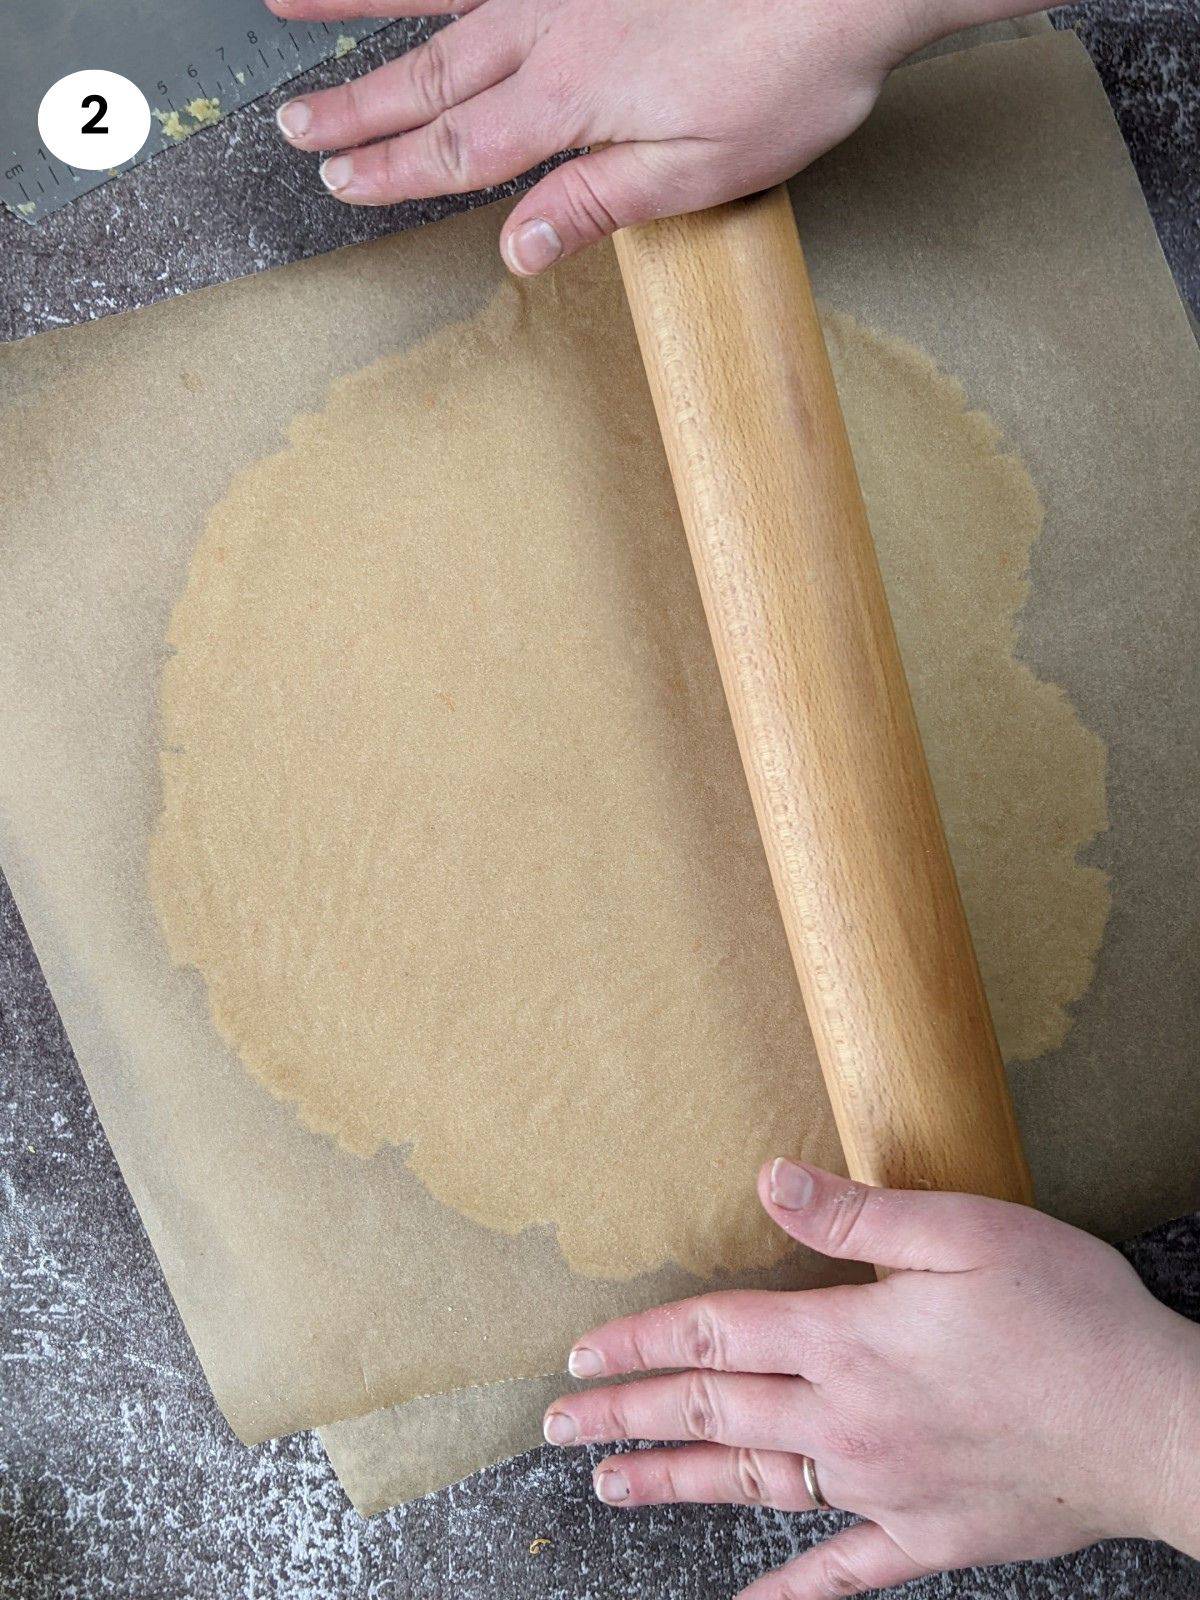 Rolling the dough into a circle between parchment paper.